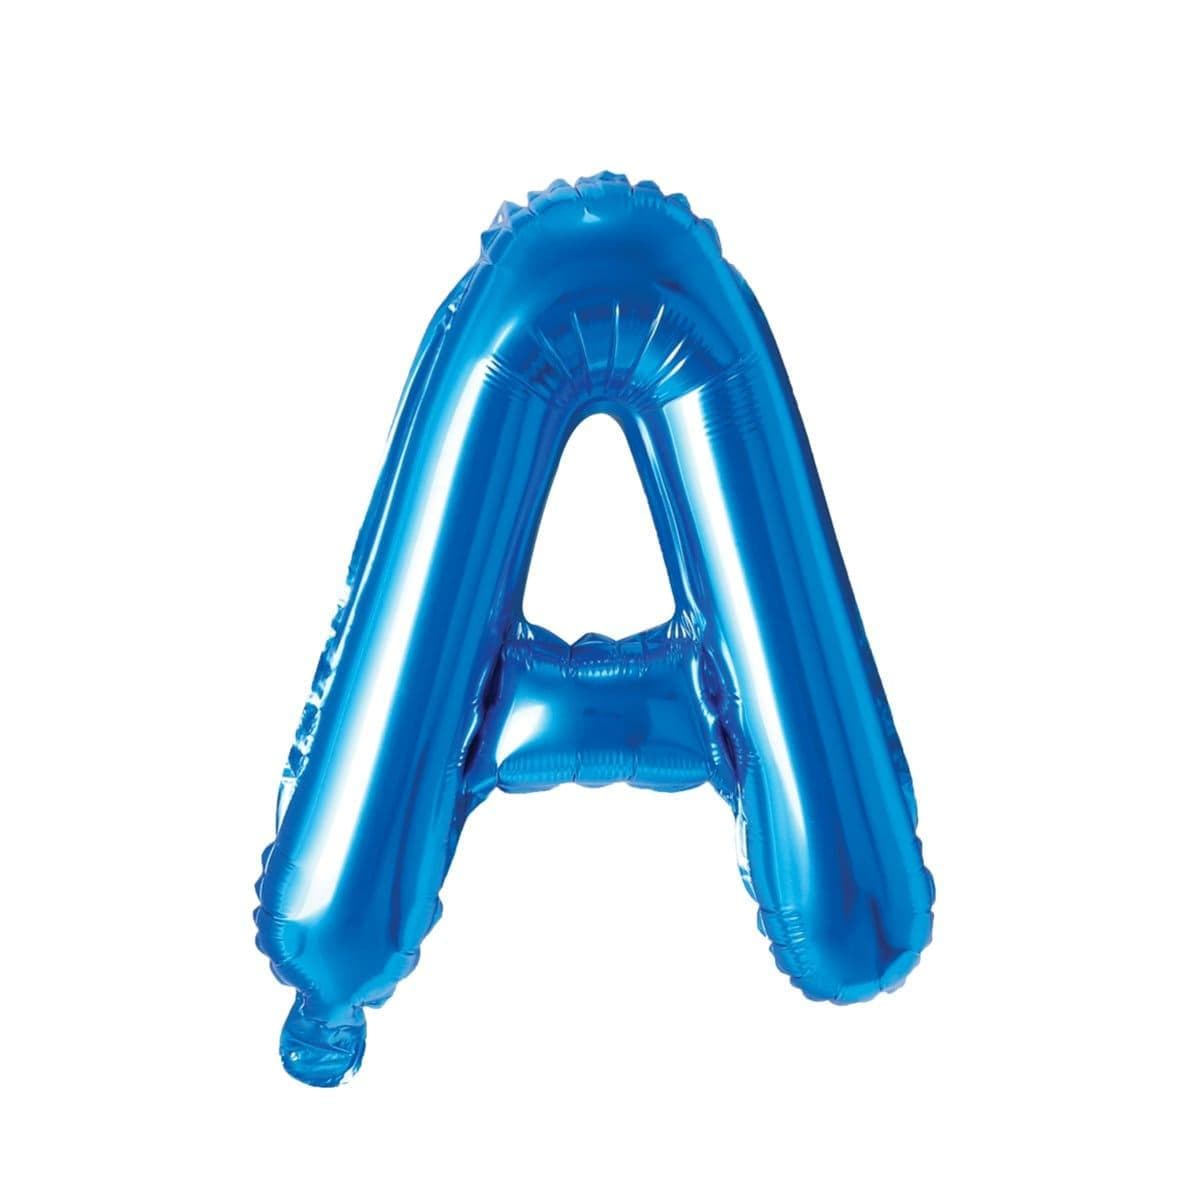 Buy Balloons Blue Letter A Foil Balloon, 16 Inches sold at Party Expert